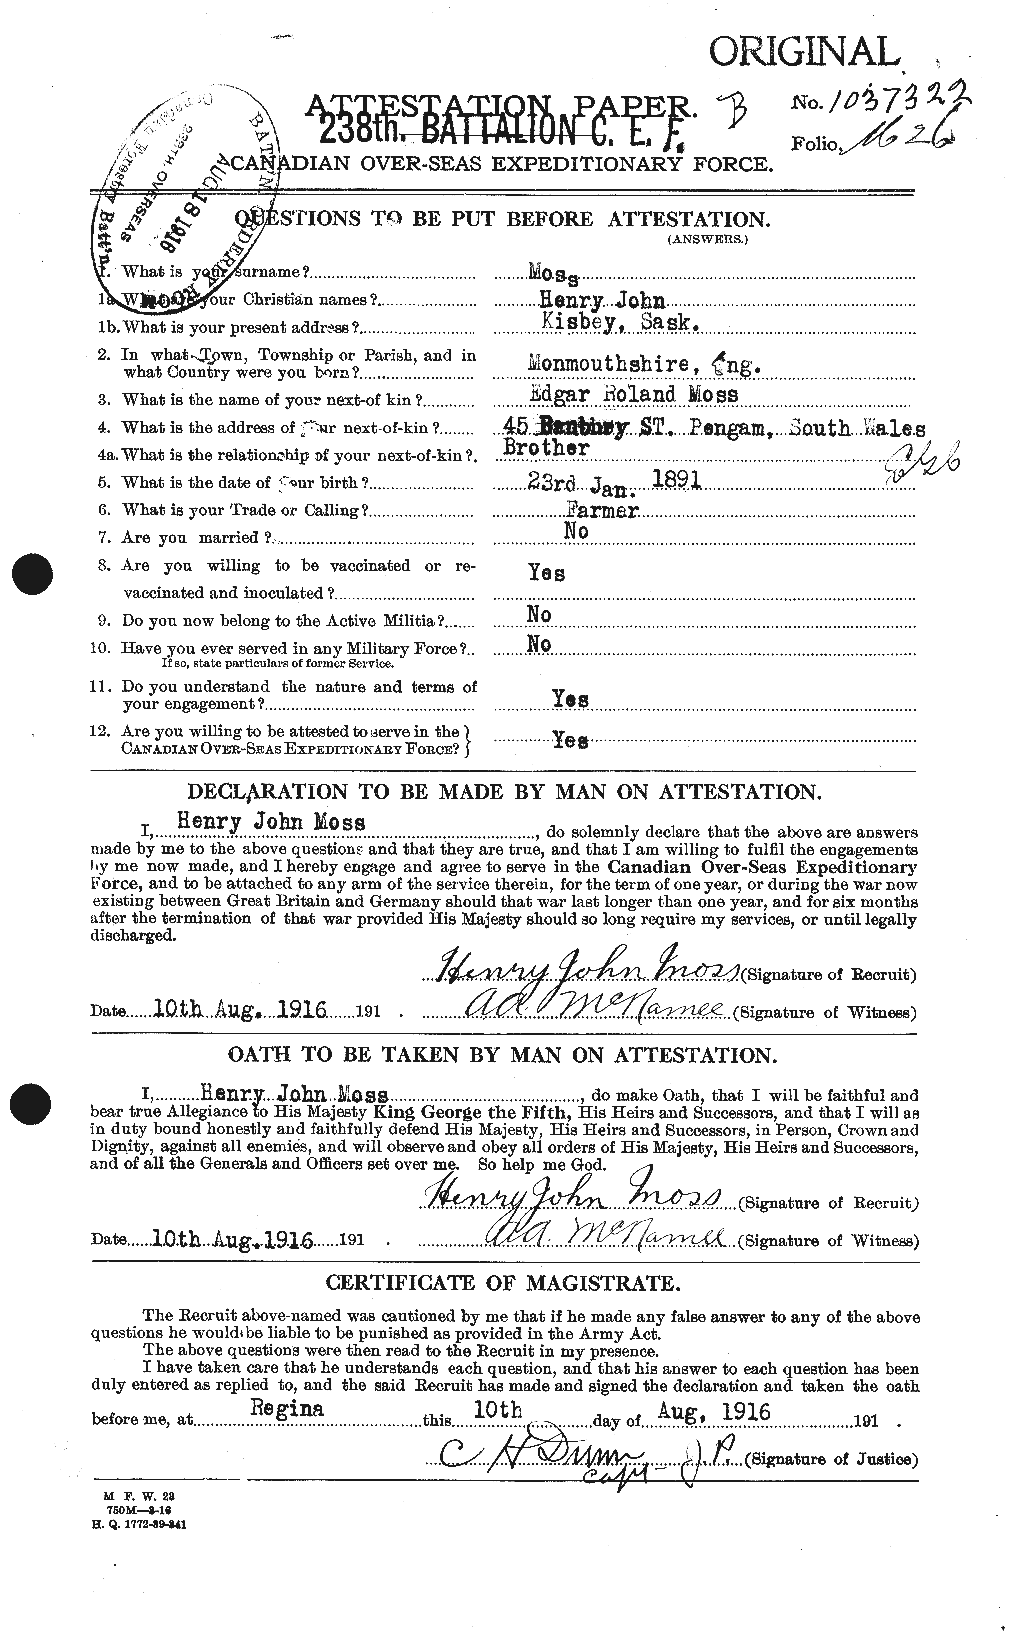 Personnel Records of the First World War - CEF 512008a